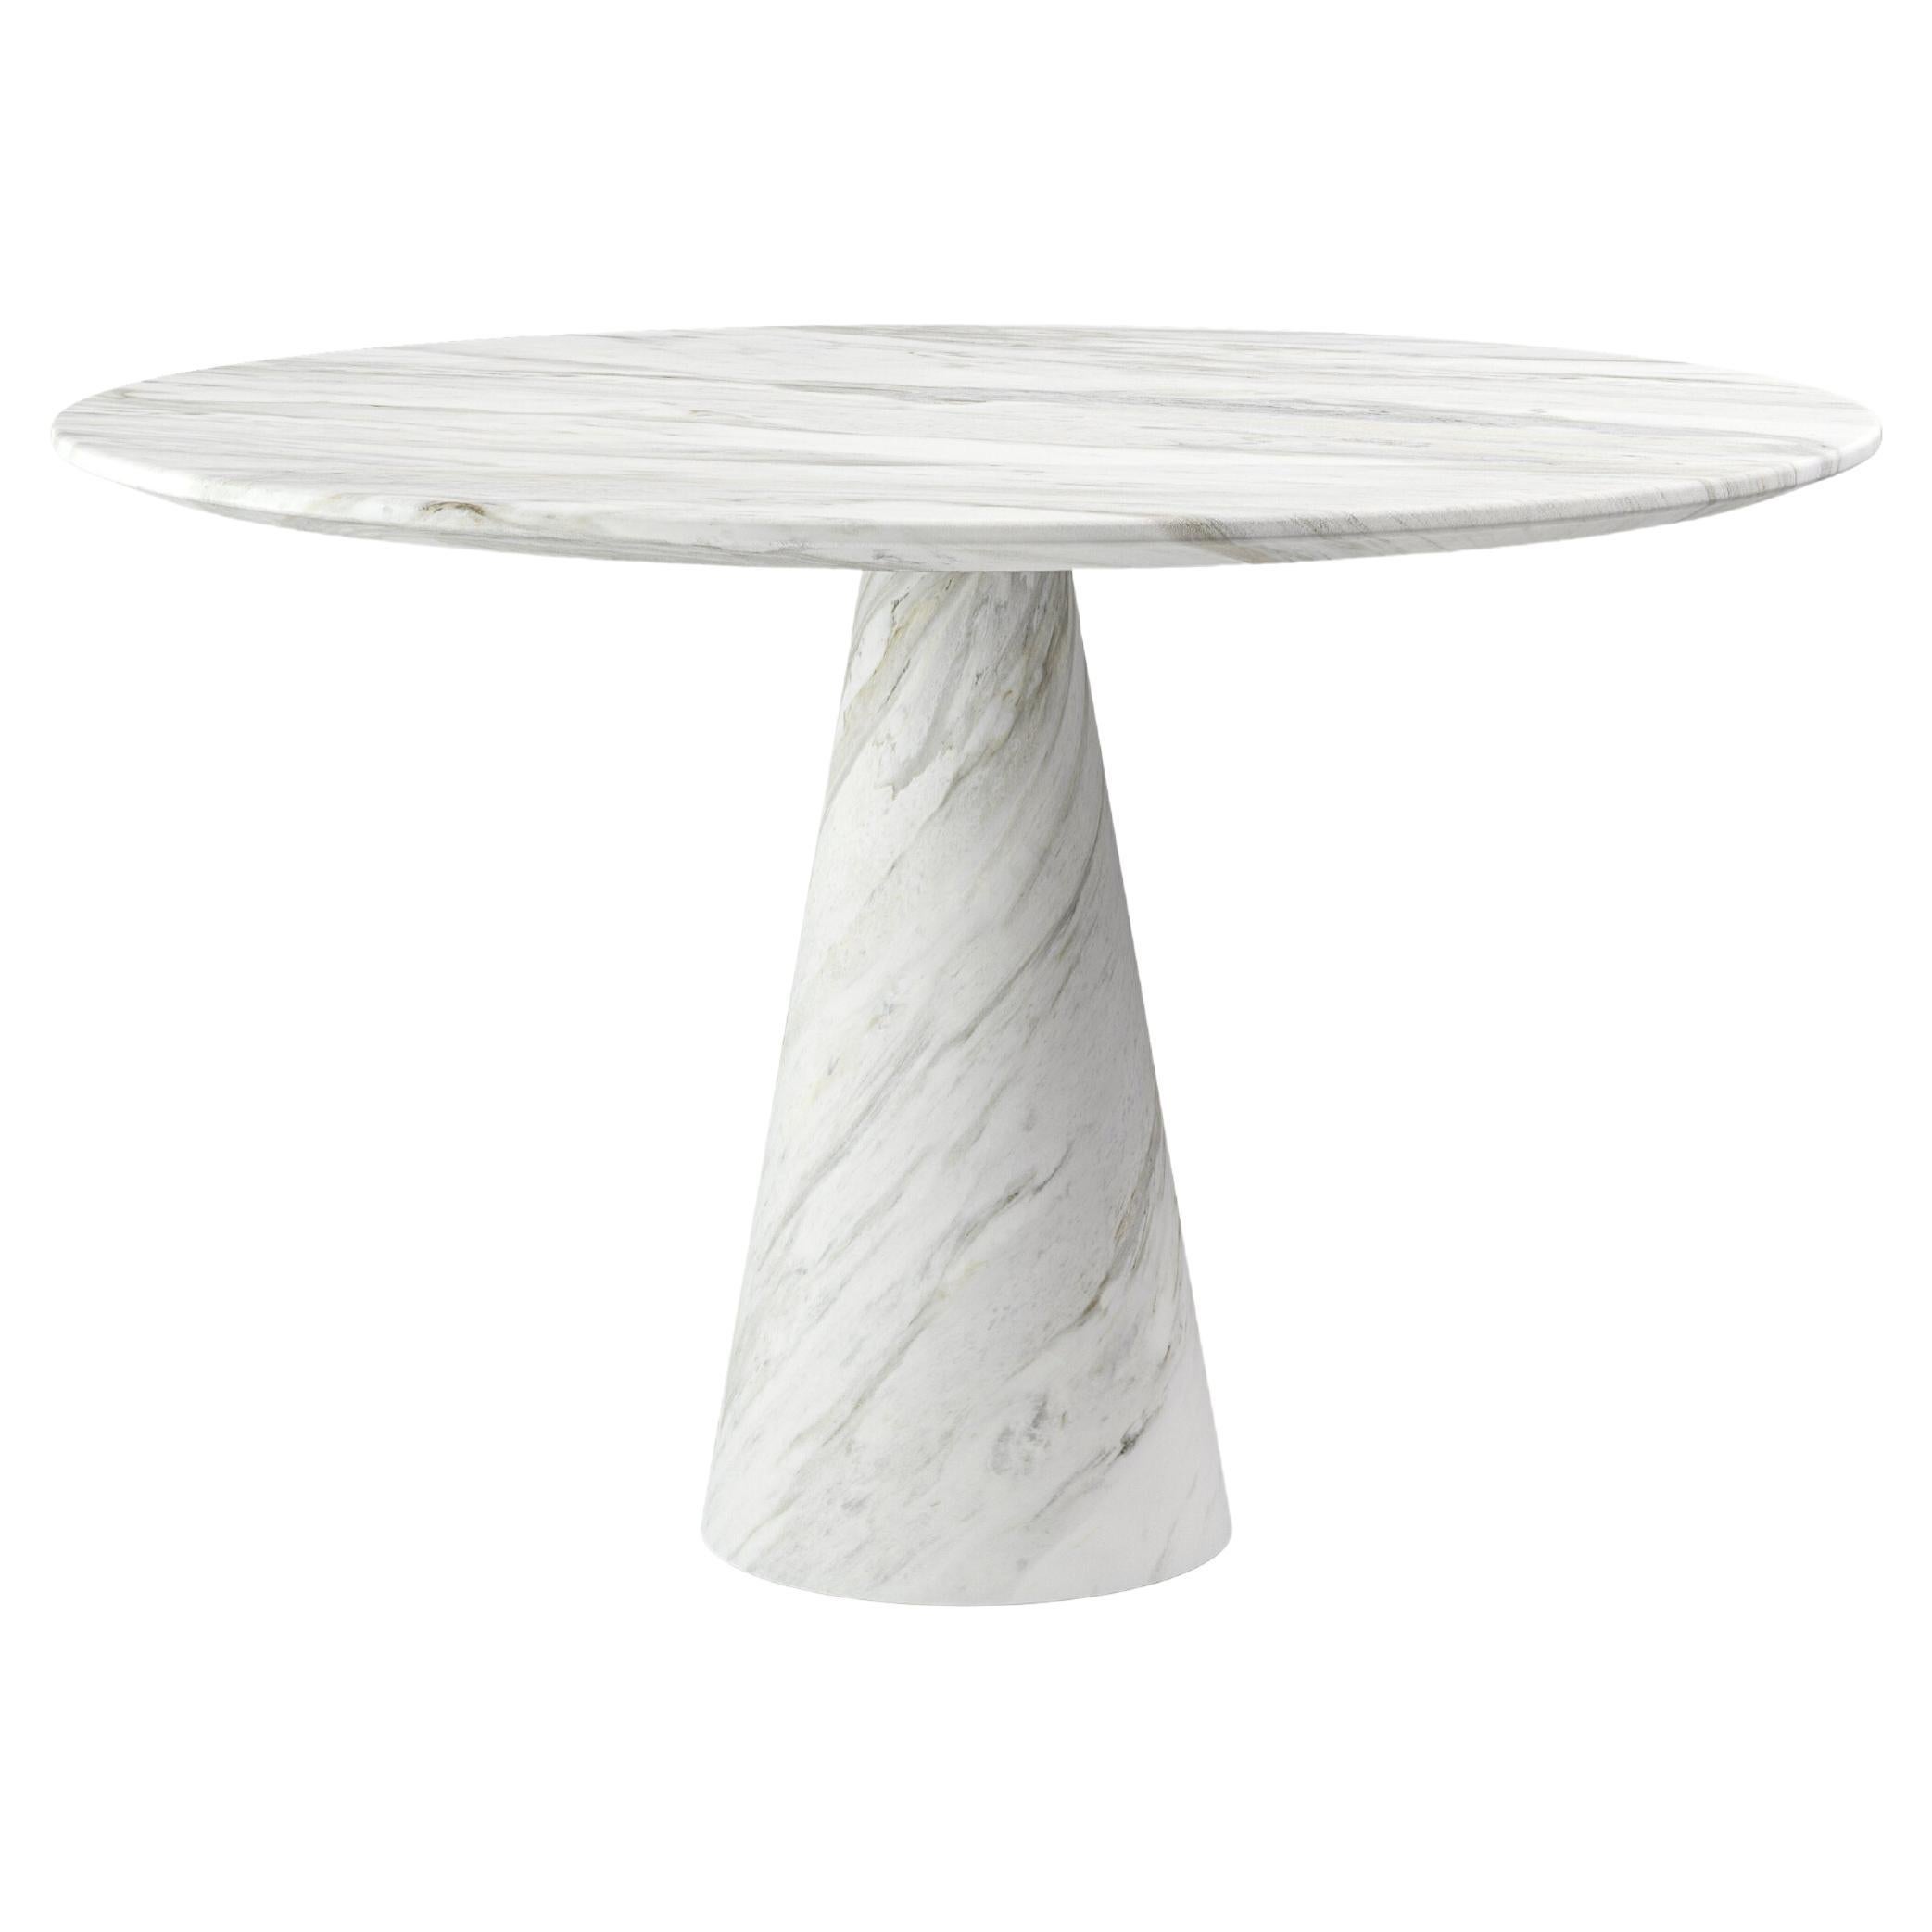 FORM(LA) Cono Round Dining Table 36”L x 36”W x 30”H Volakas White Marble For Sale